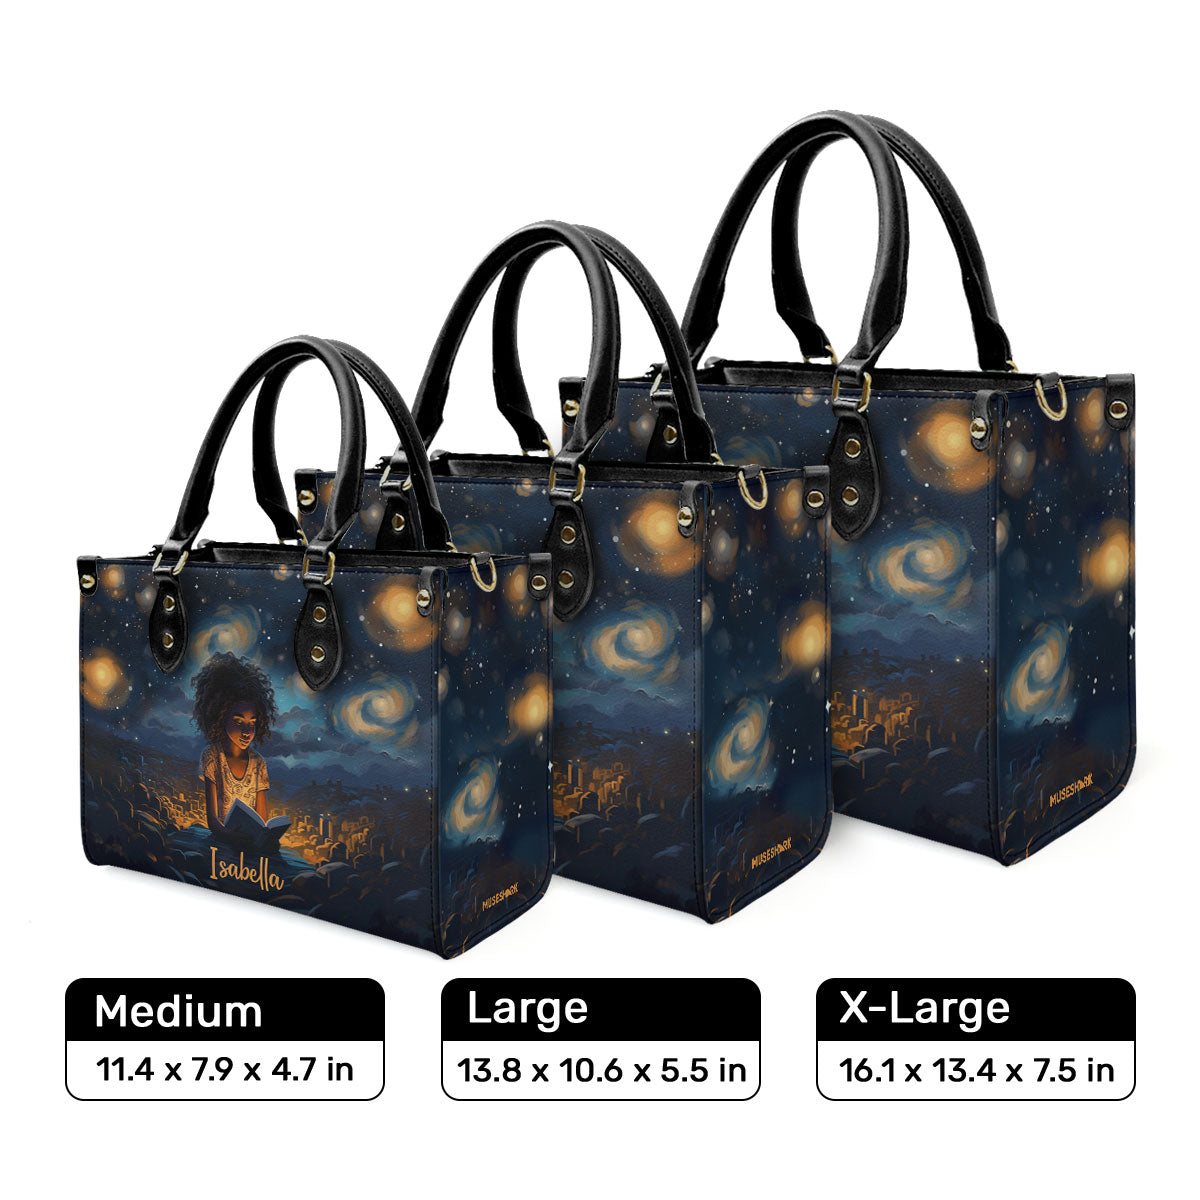 Girl In The Starry Night - Personalized Leather Handbag MS-NH14